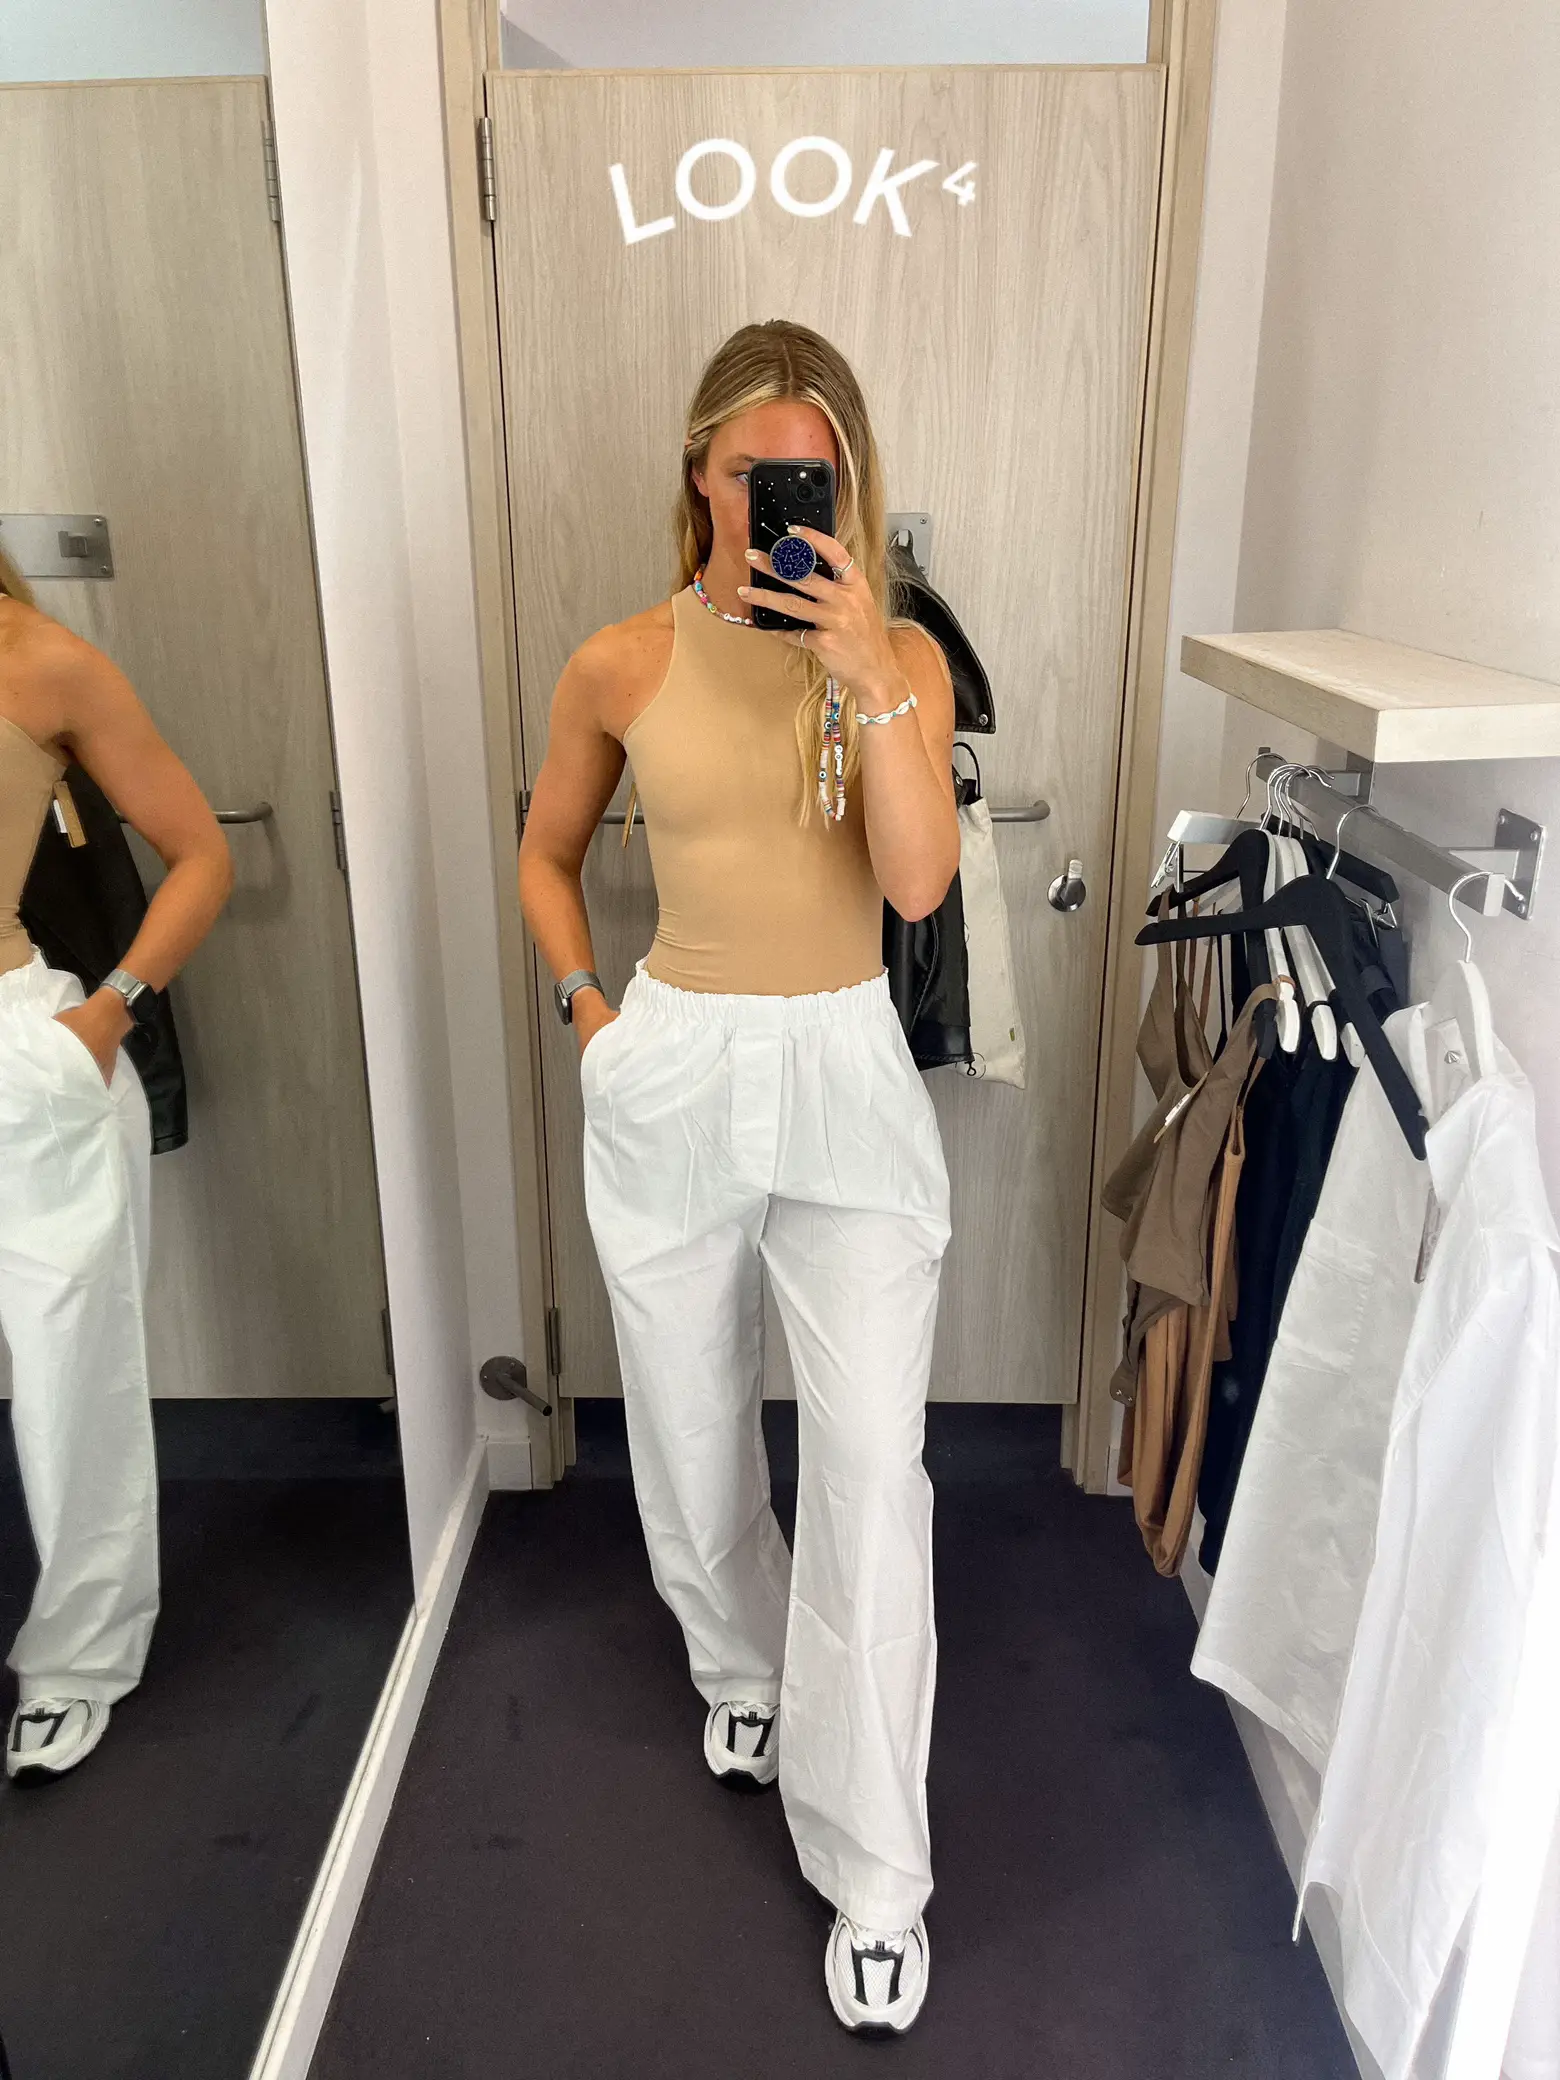 Skims dupes from H&M ‼️, Gallery posted by Rhiwanders